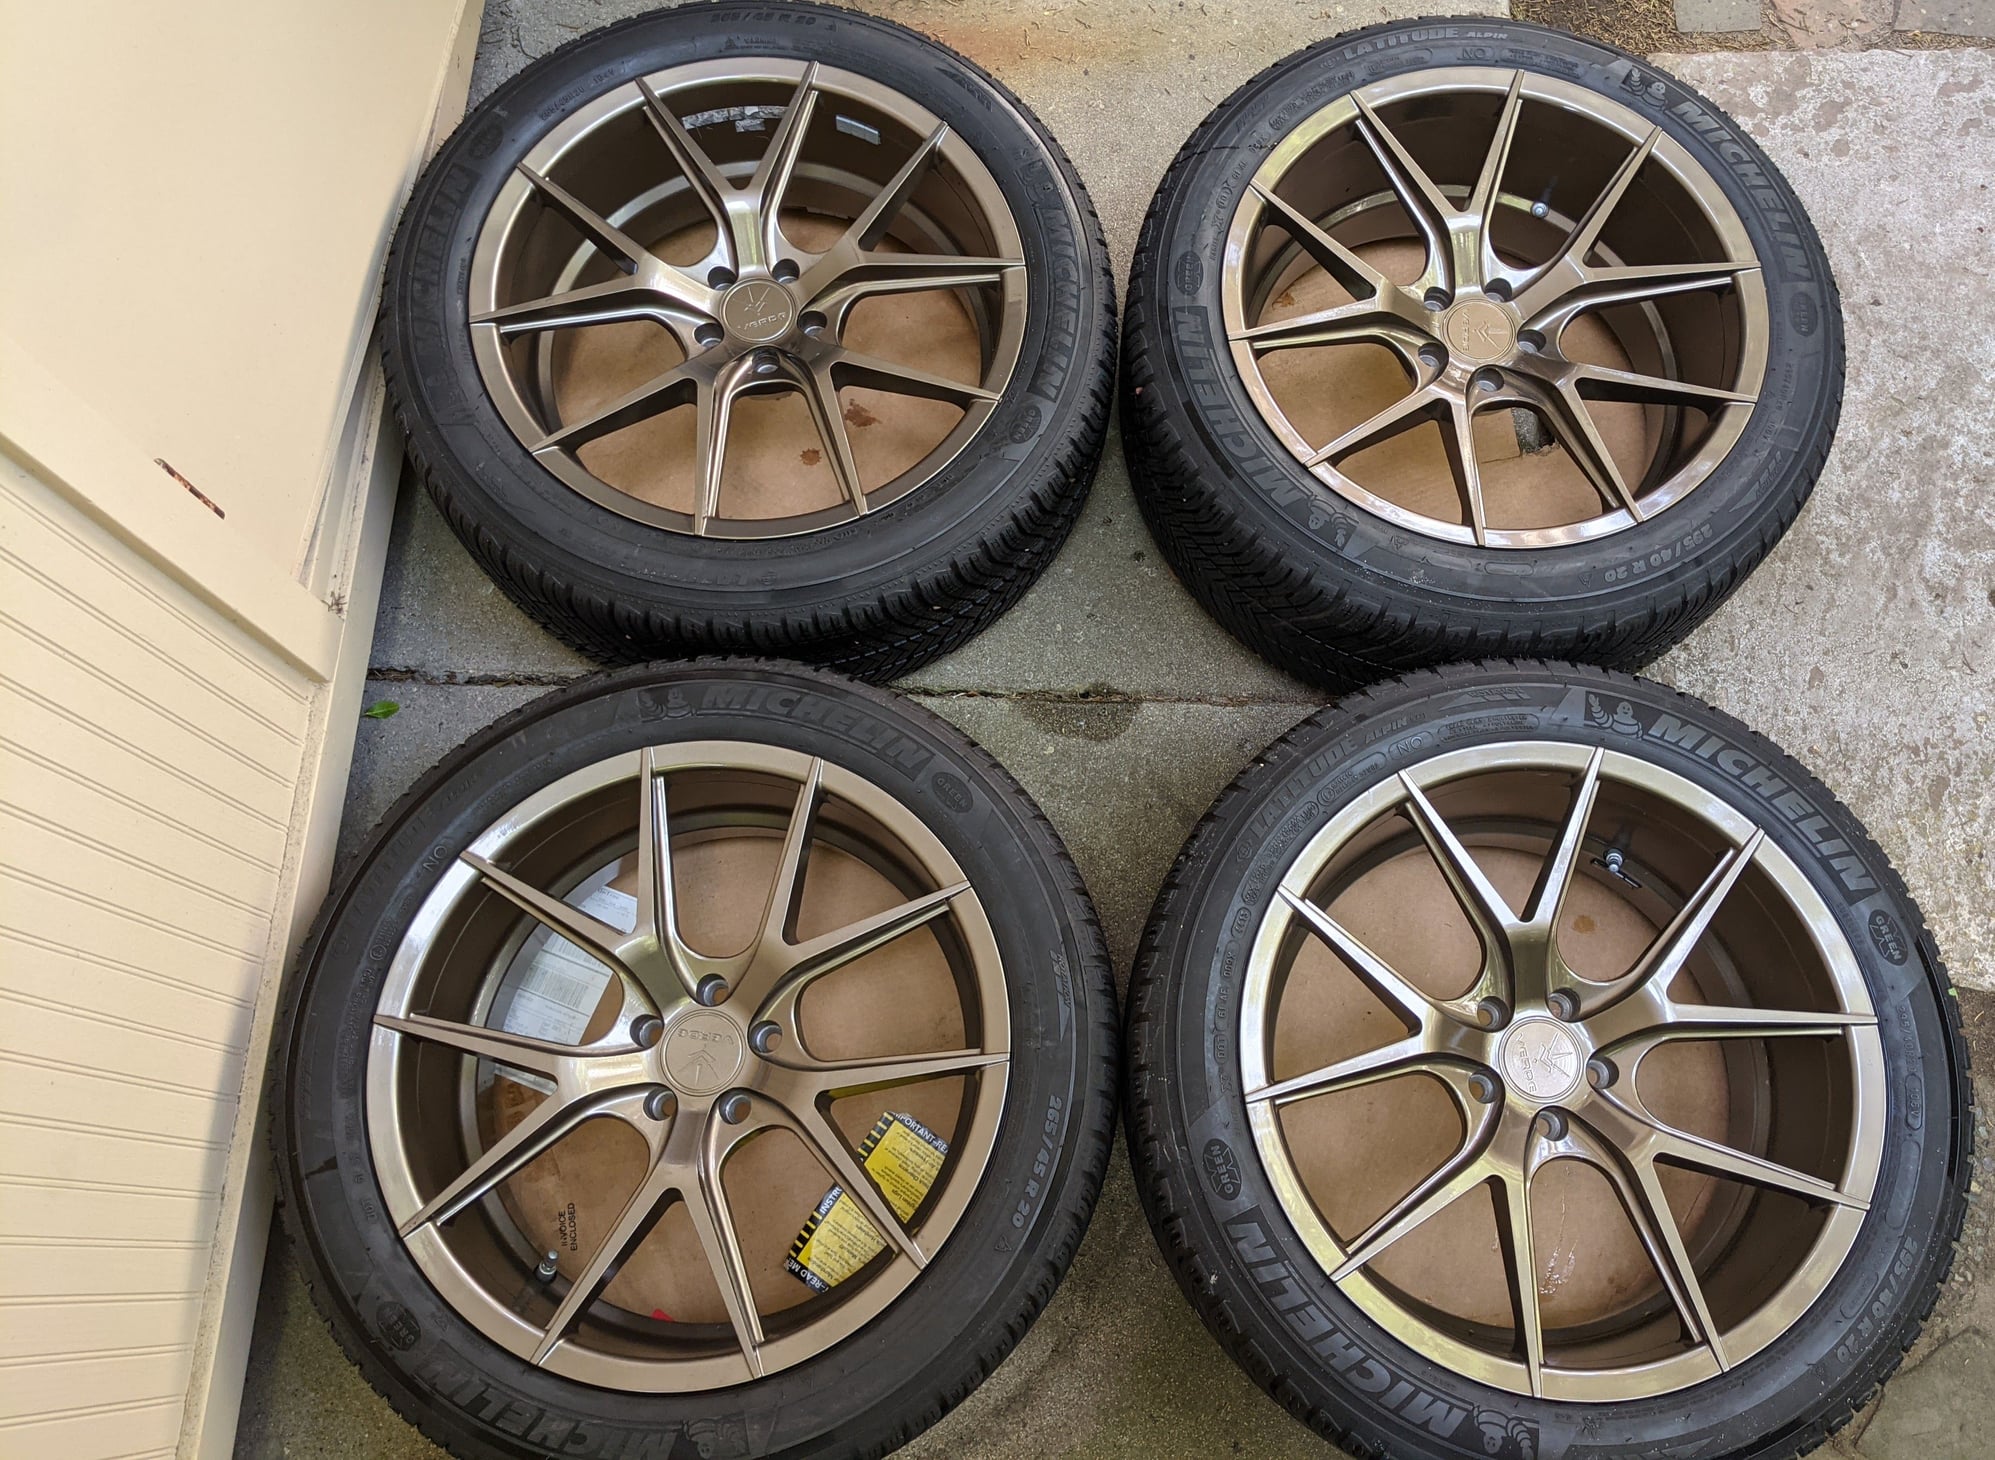 Wheels and Tires/Axles - Porsche Macan Winter Snow Wheels + Tires - N0 rated (Also Fit Audi Q5/SQ5) - Used - 2014 to 2021 Porsche Macan - 2008 to 2021 Audi SQ5 - 2008 to 2021 Audi Q5 - Pebble Beach, CA 93953, United States